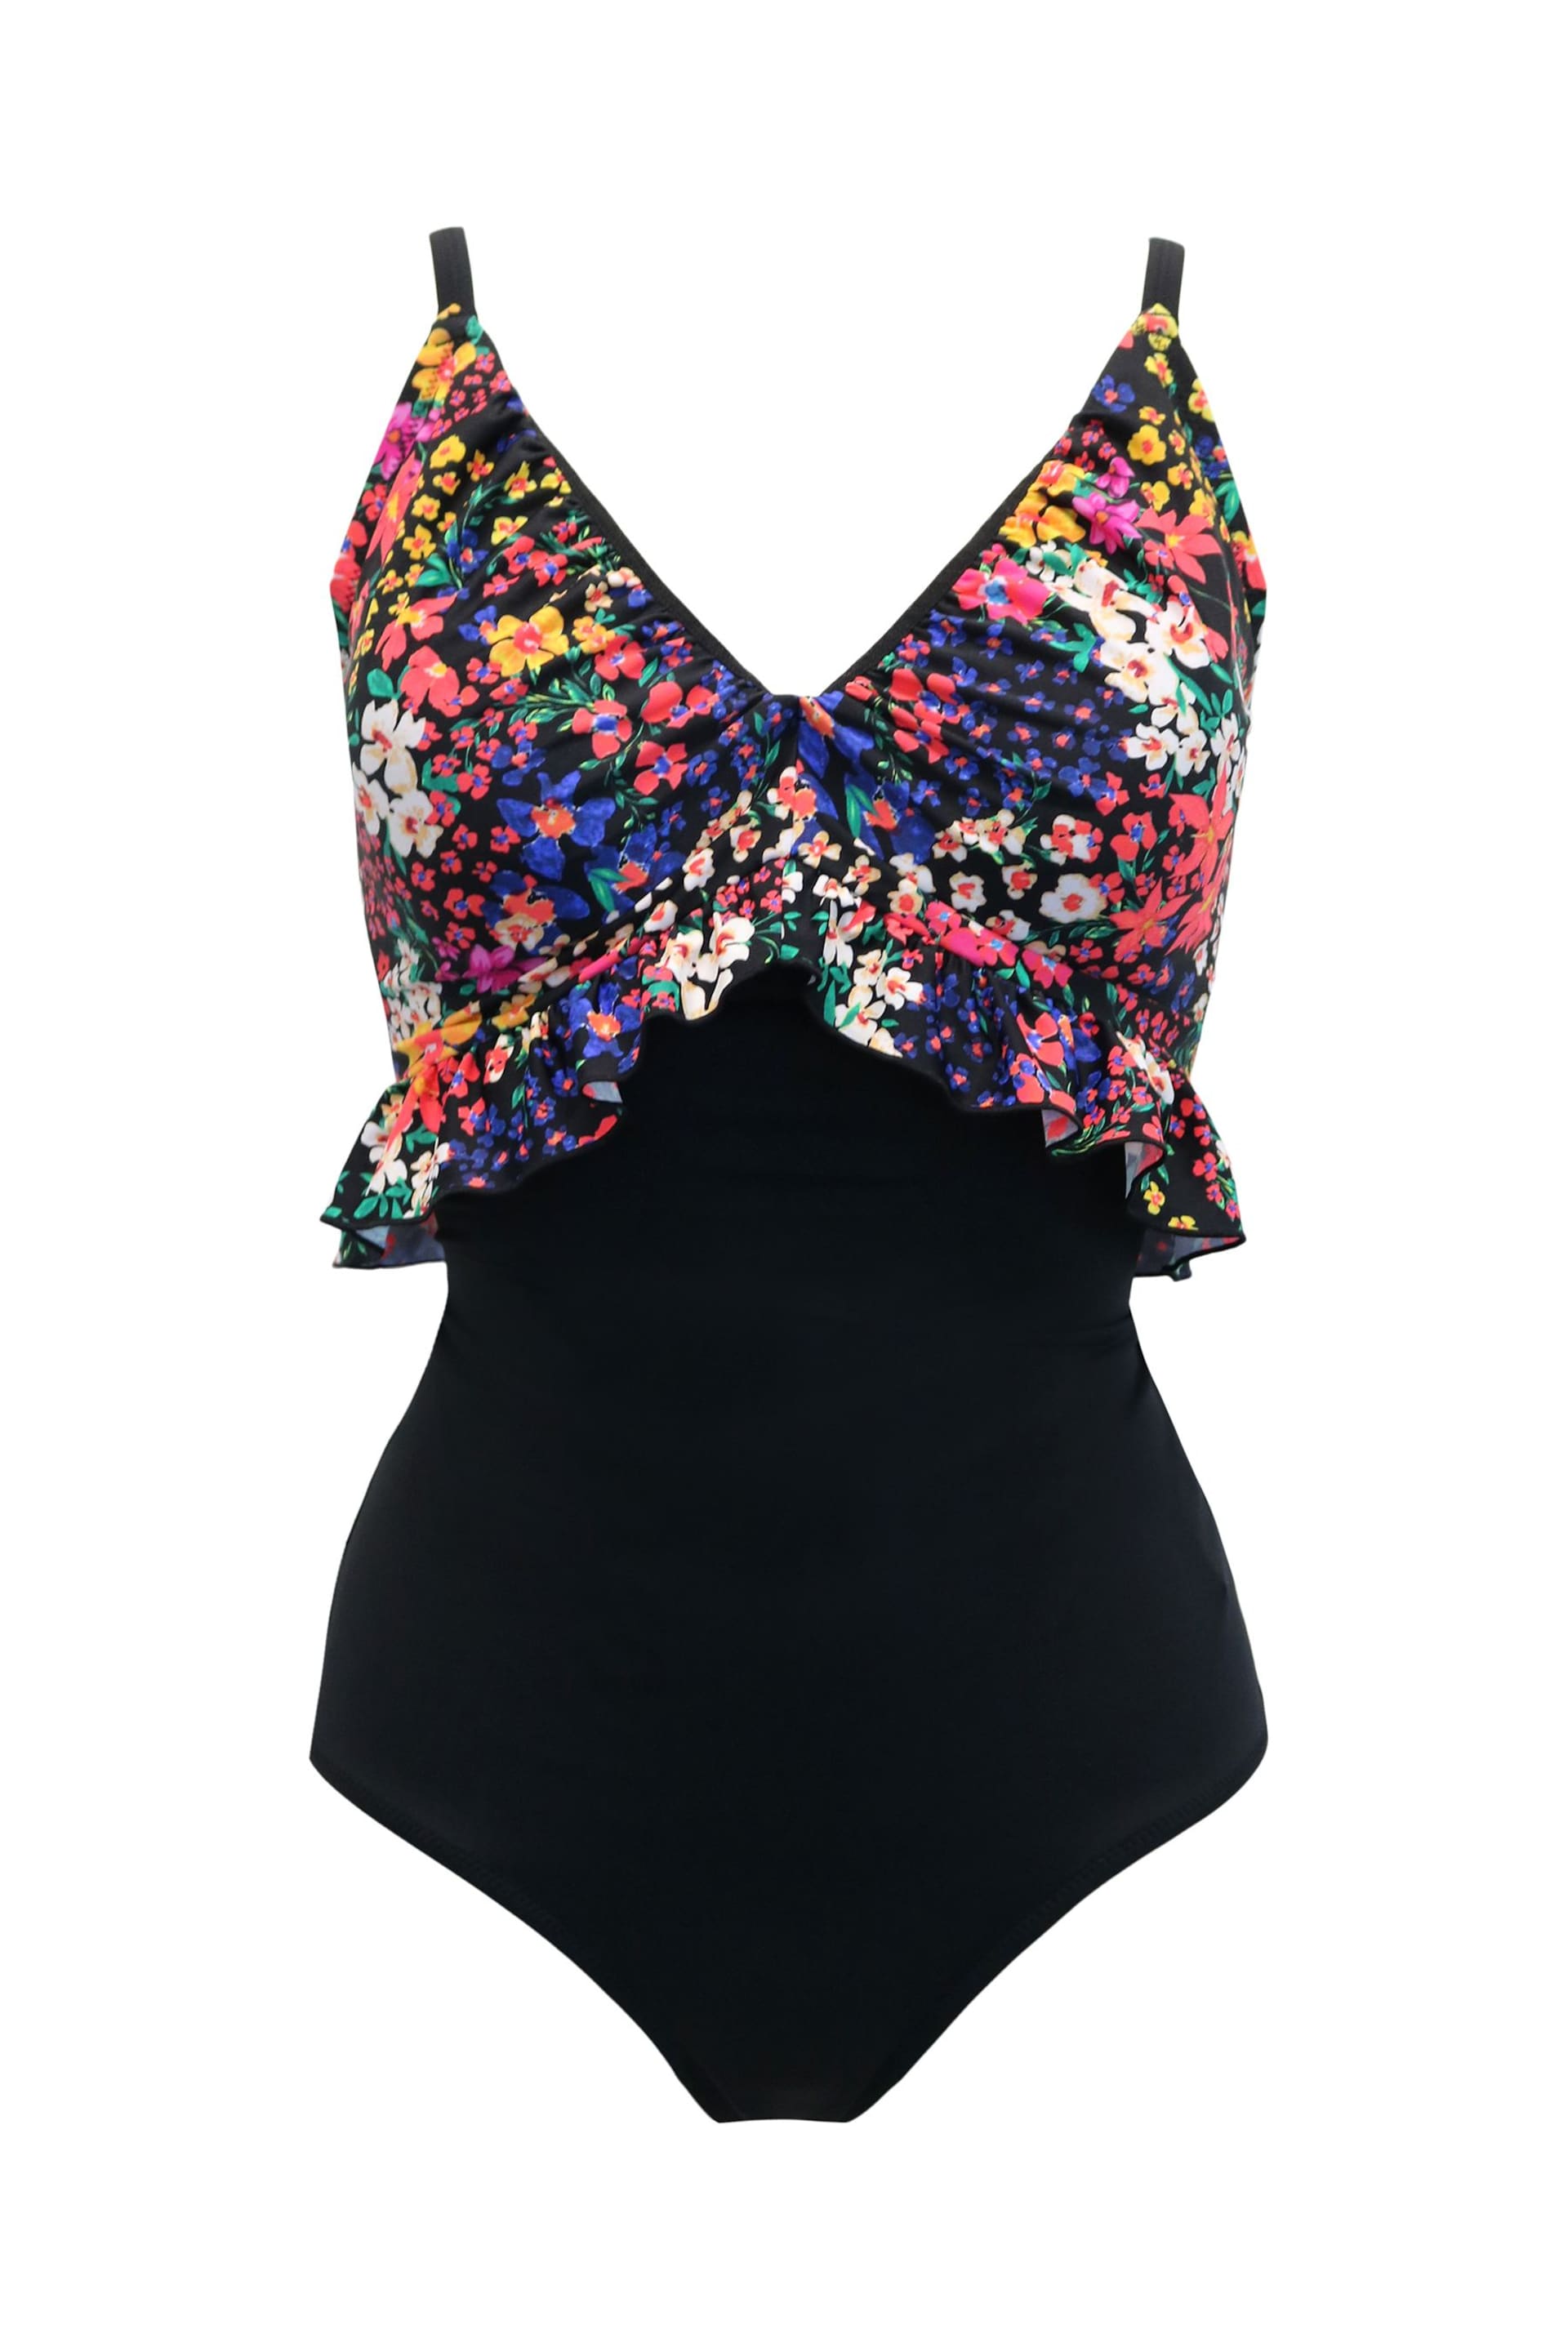 Pour Moi Black Ditsy Multi Hot Spots Frill Control Swimsuit - Image 4 of 5